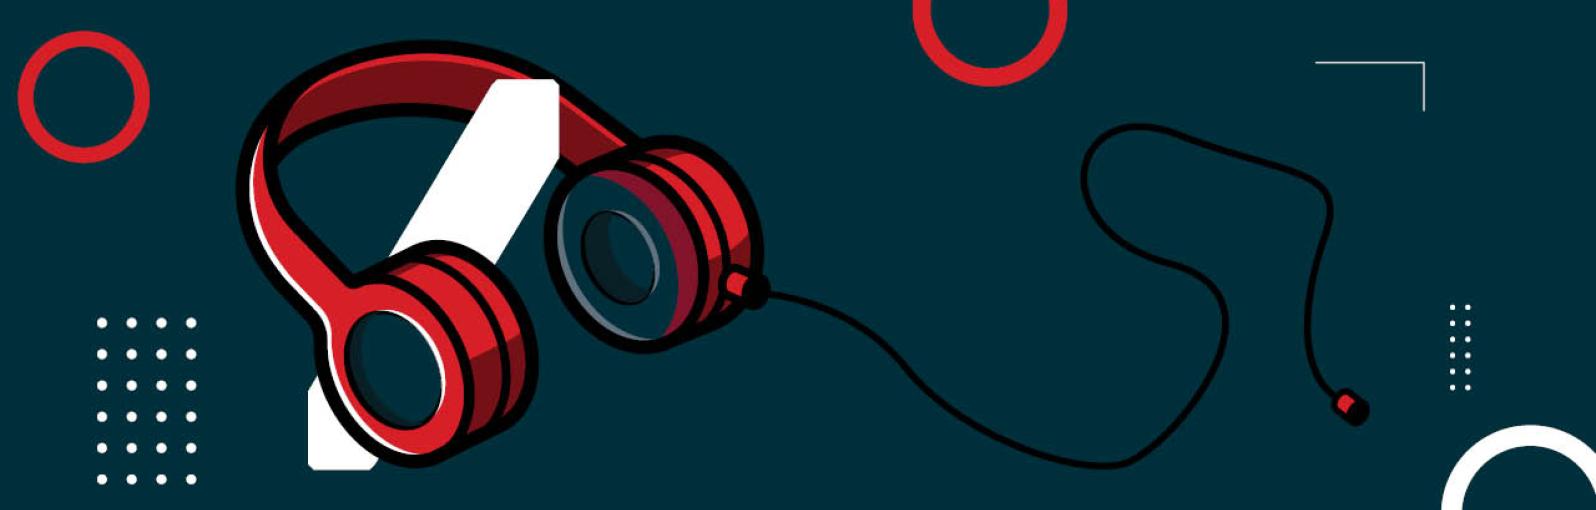 Navy background with white and red circle icons. Logo is headphones wrapped around a slash